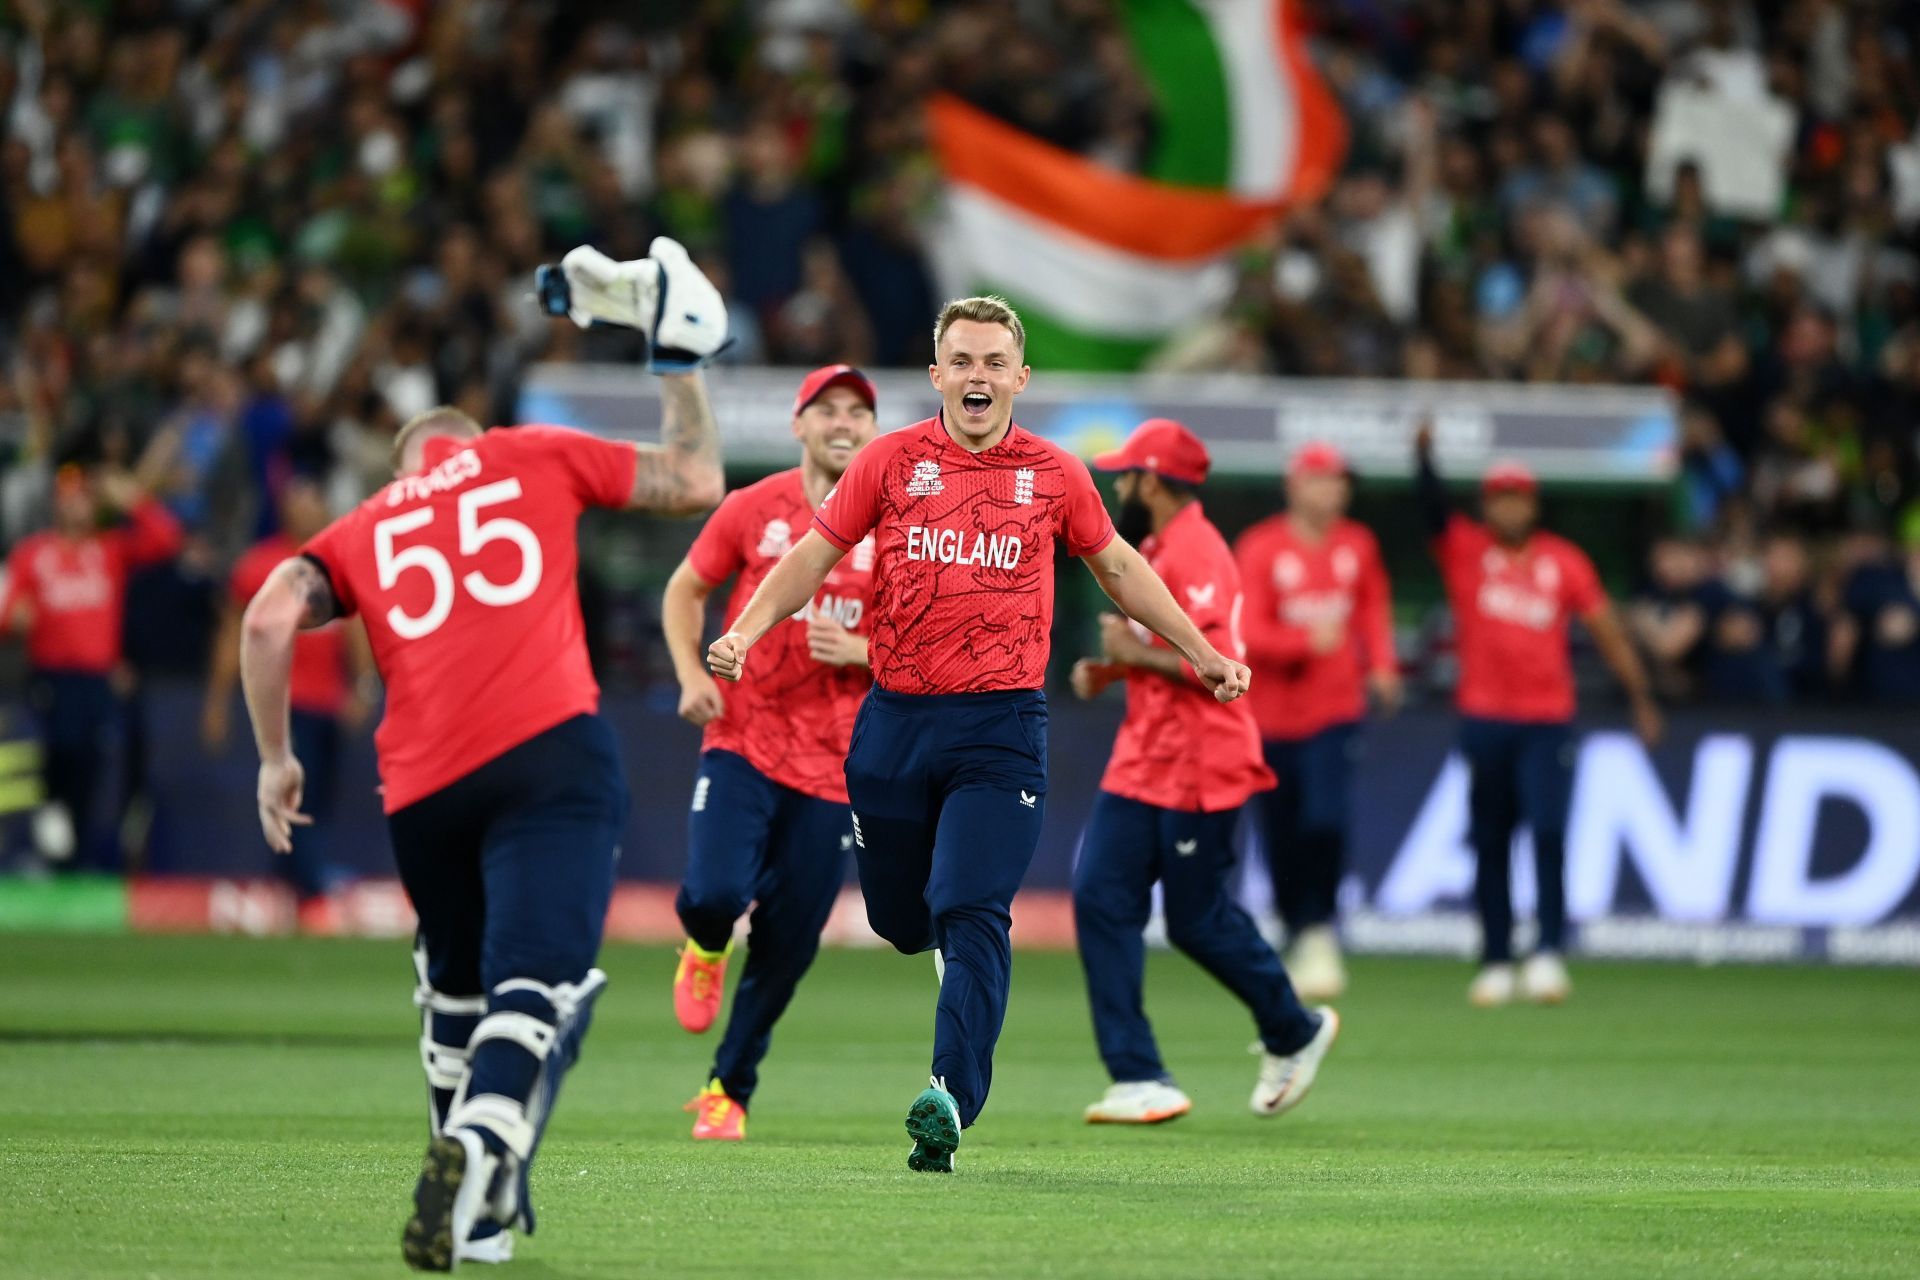 Sam Curran bagged the Player of the Match Award in the 2022 T20 World Cup final.